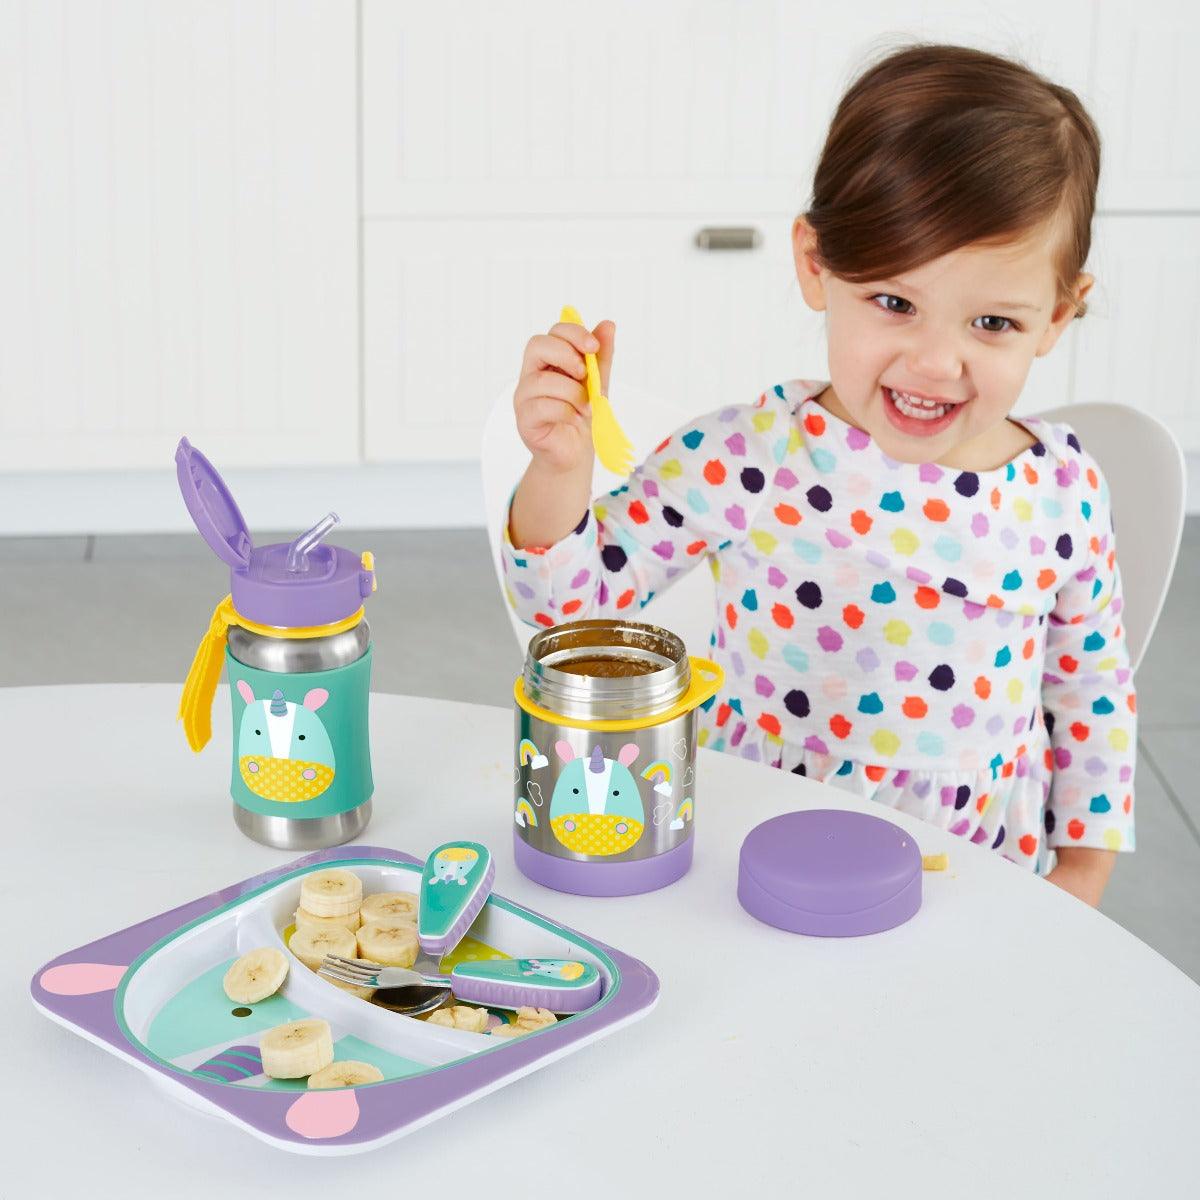 Skip Hop Zoo Utensils Fork & Spoon Unicorn - Weaning Accessory For Ages 0-3 Years